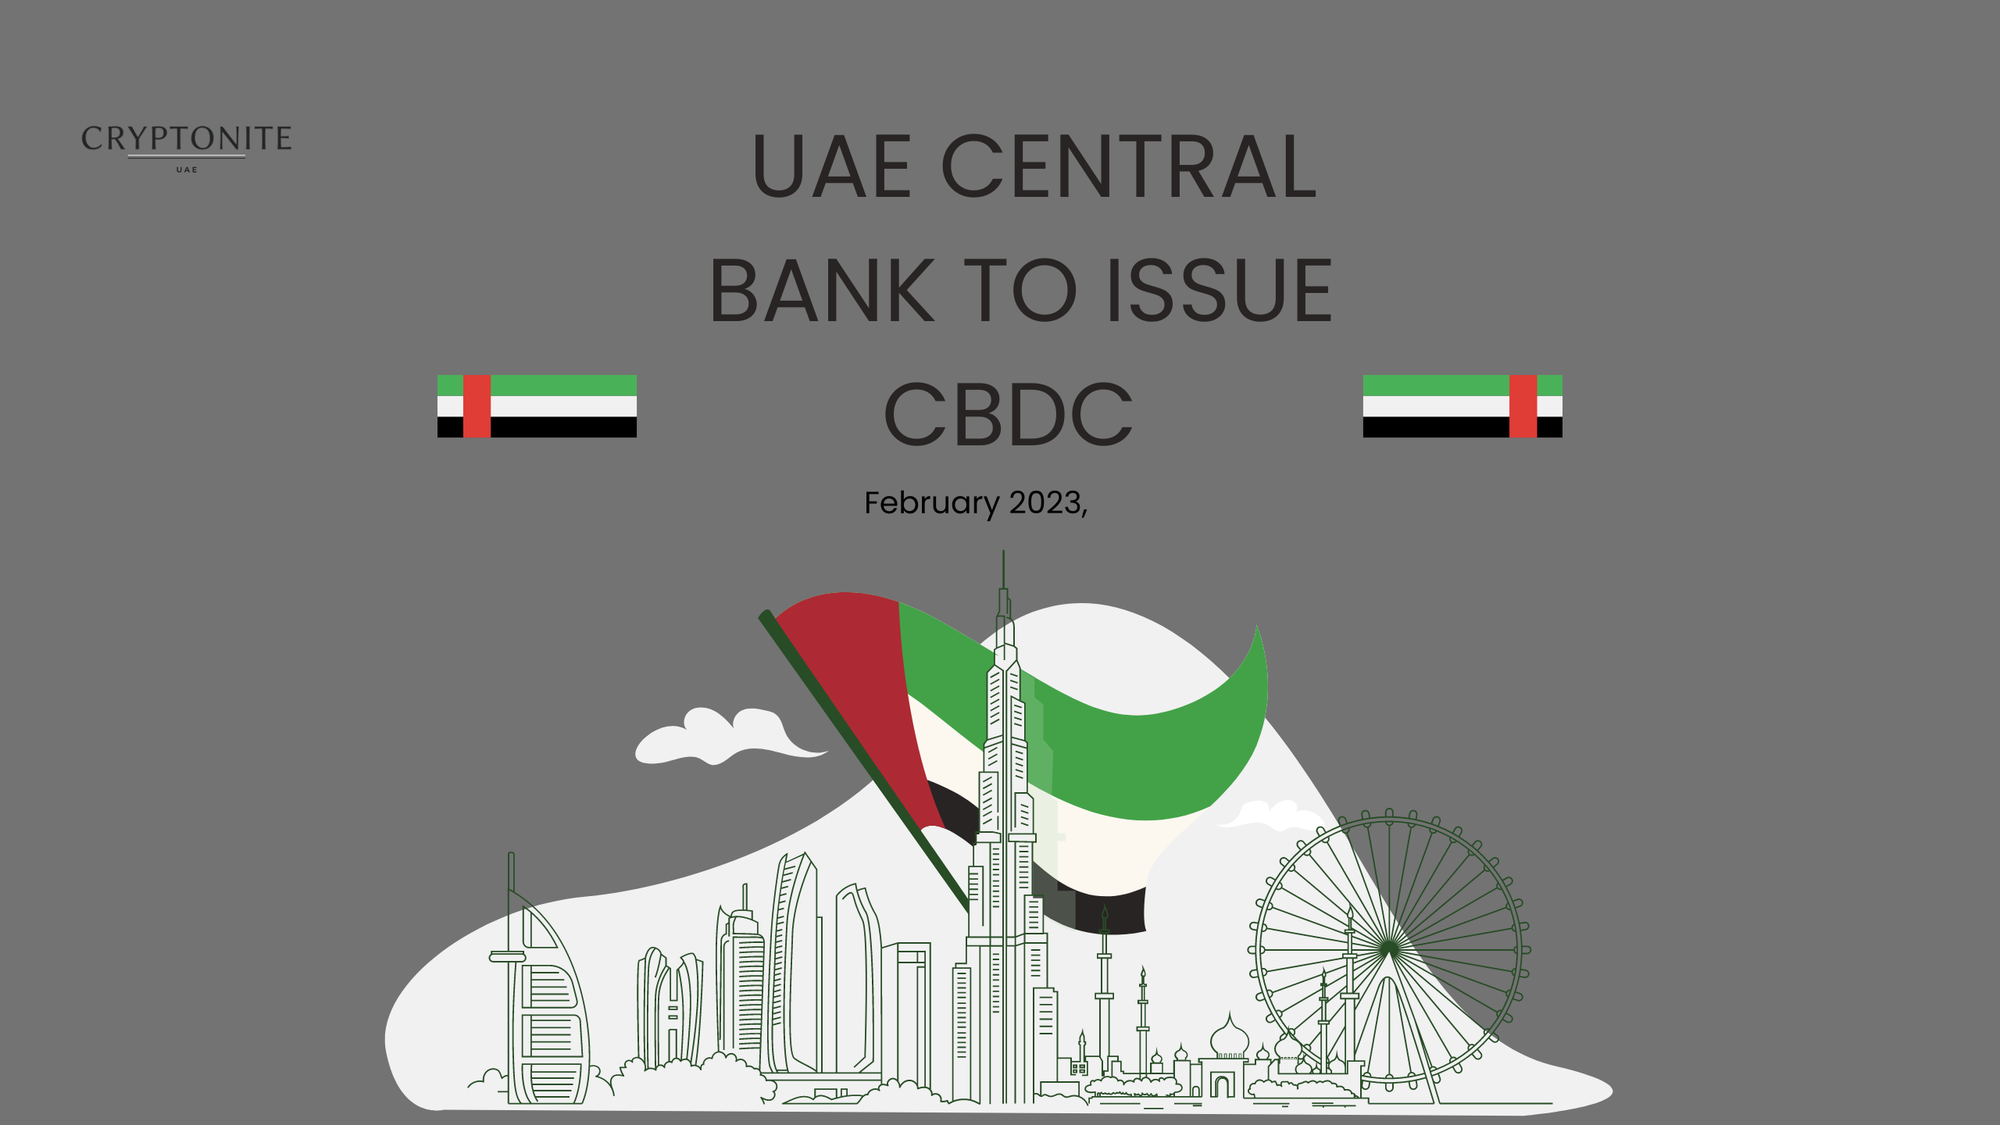 UAE central bank to issue CBDC as part of its financial transformation program